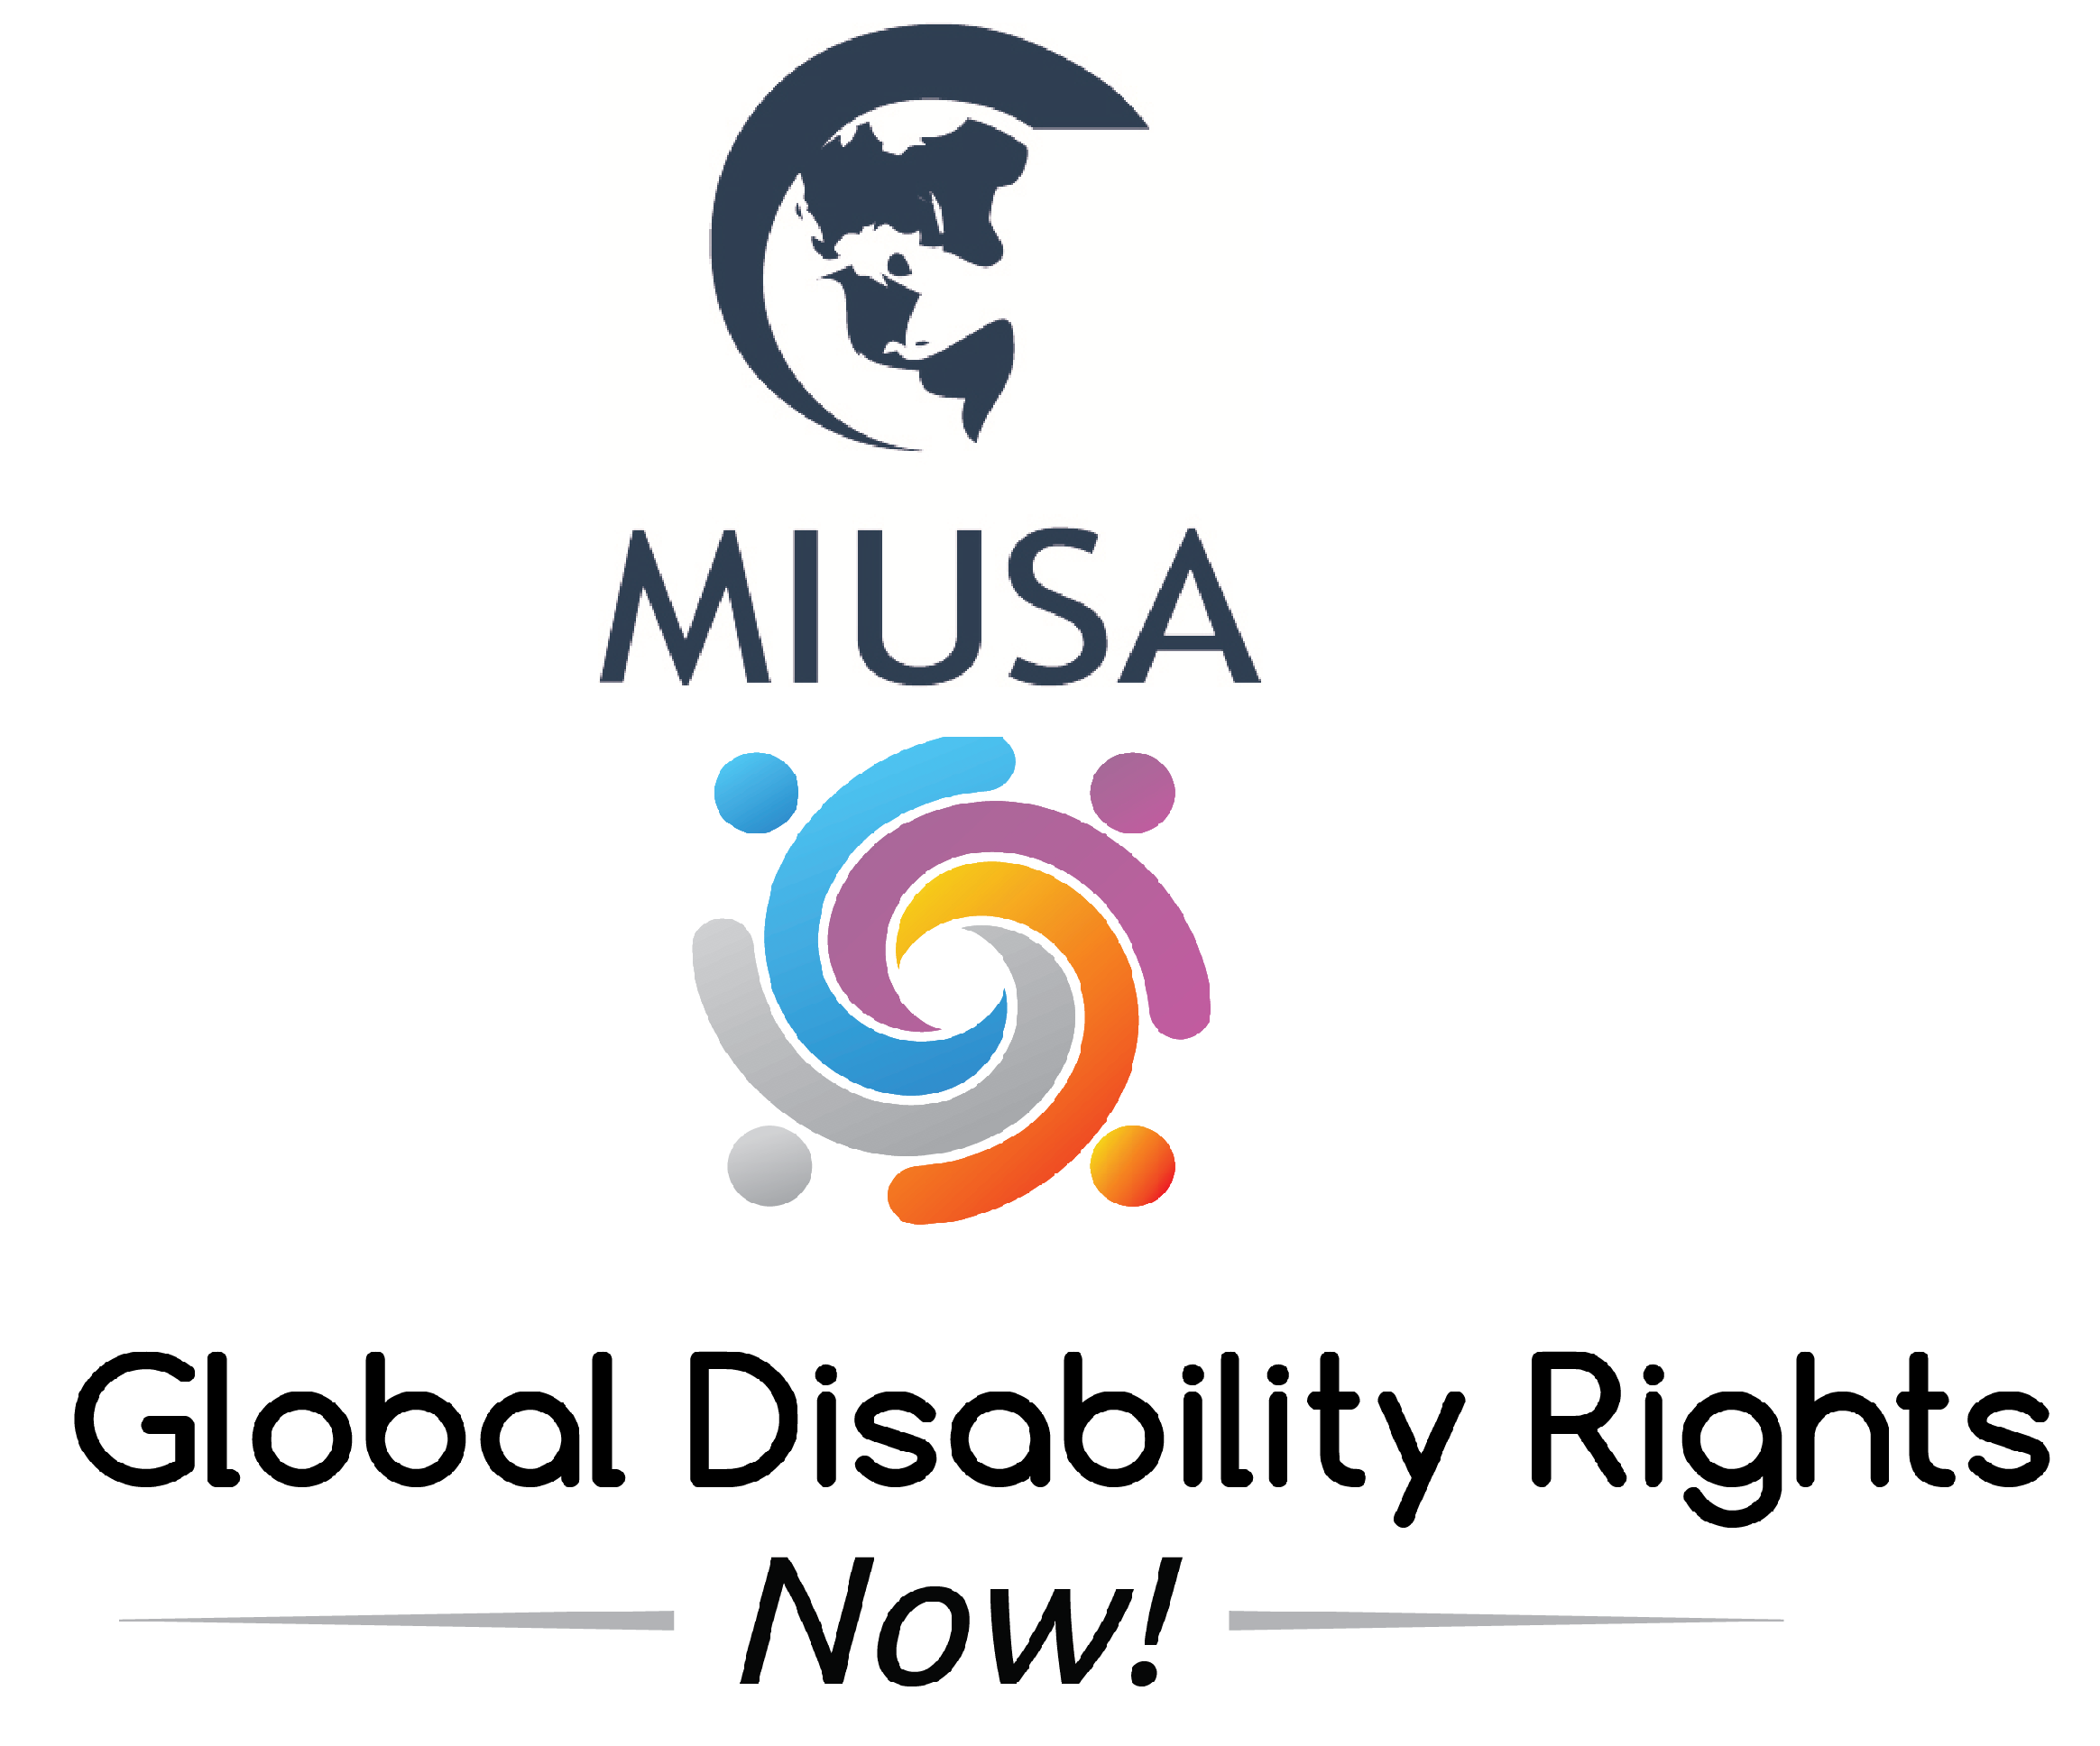 Website - Logo - https://s41078.pcdn.co/wp-content/uploads/2018/11/MIUSA-Prmary-Global-logo.png